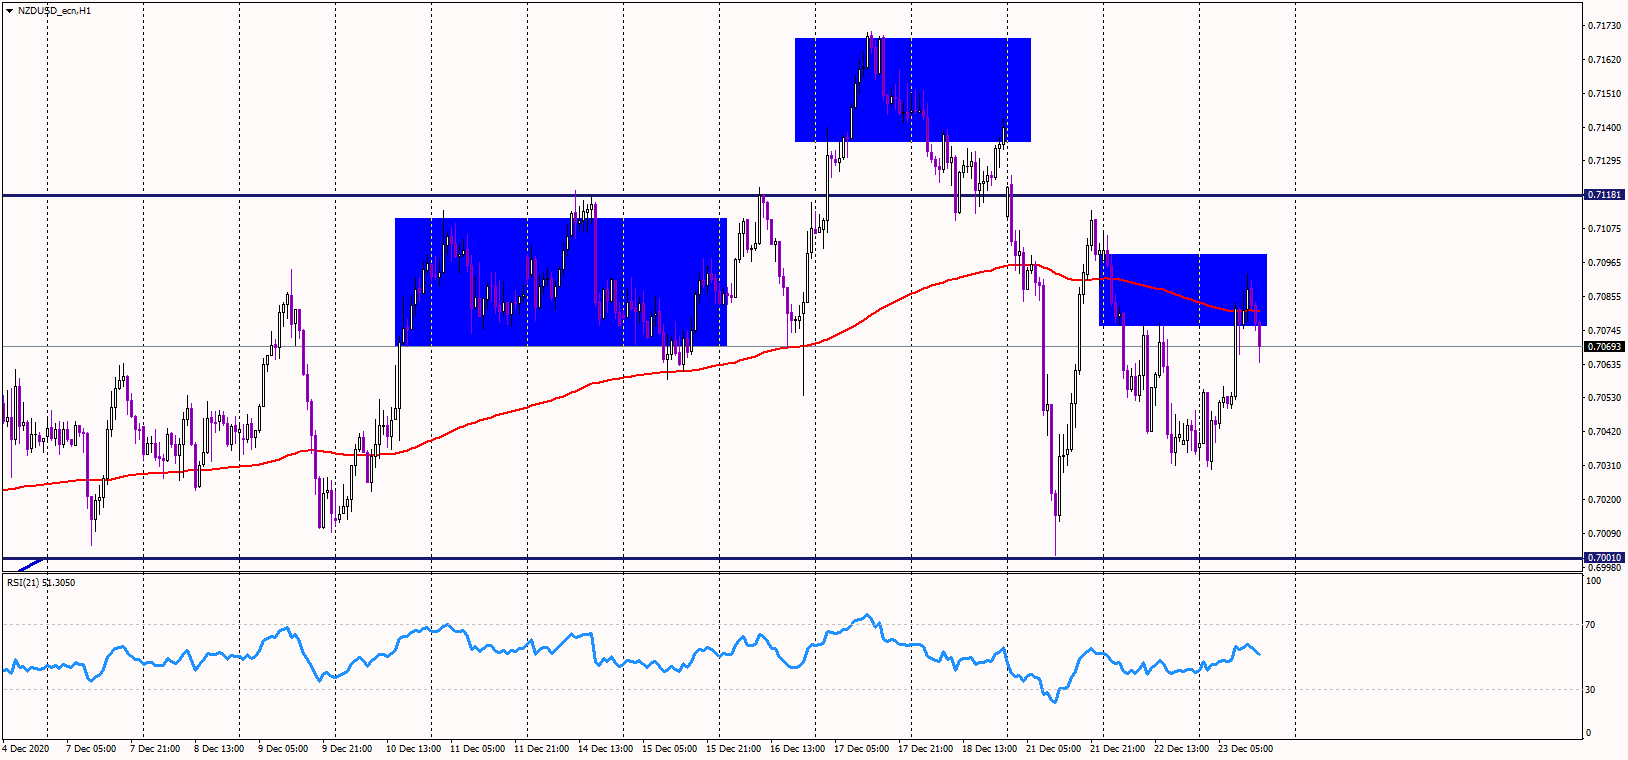 NZDUSD consolidates, forms HnS pattern